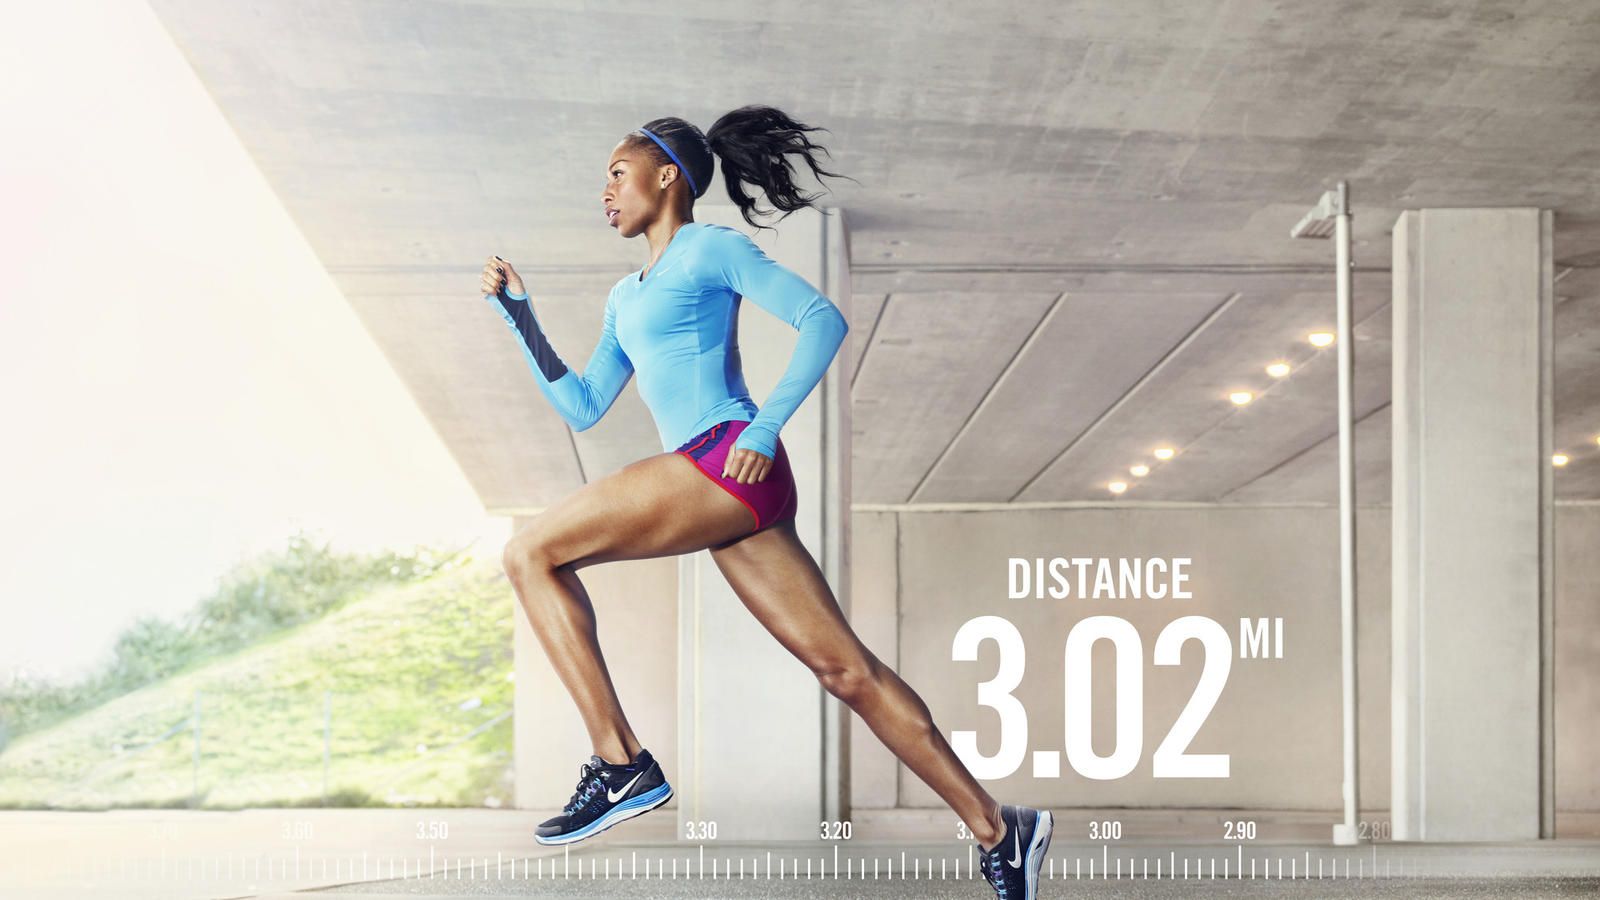 The New Nike+ Running Experience: Smarter, More Social, More